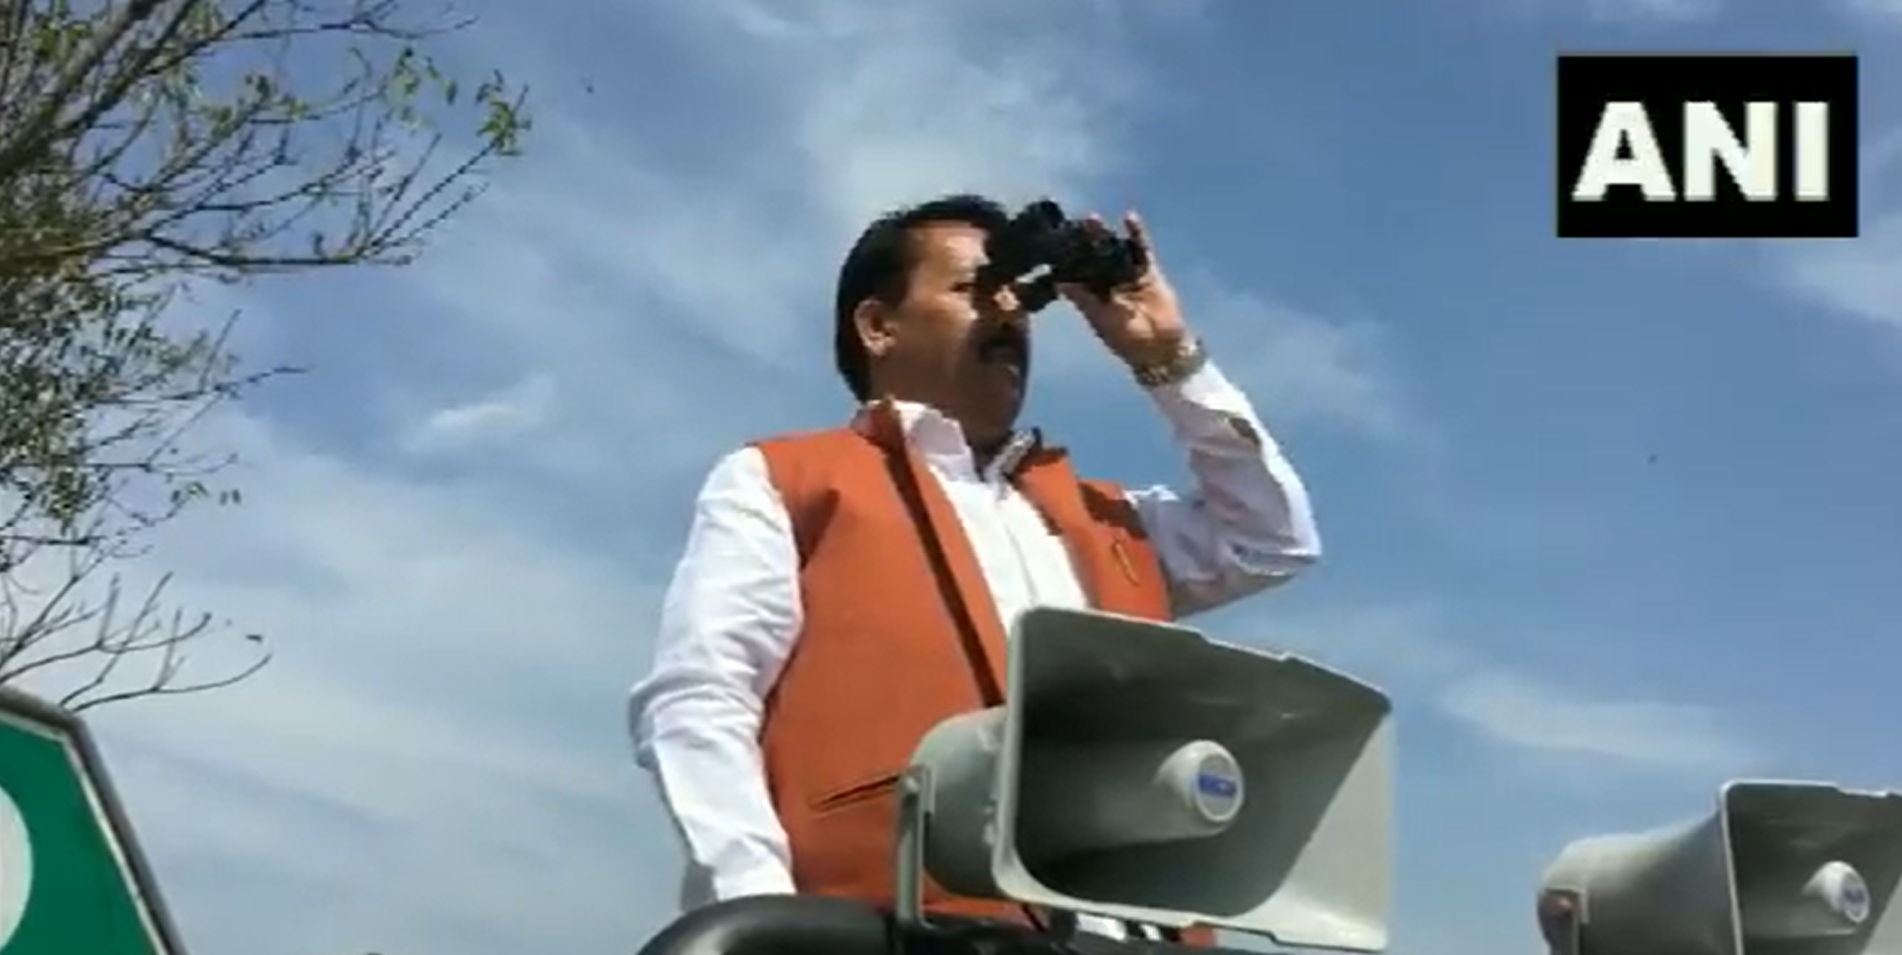 Losing focus: SP candidate who monitored EVM room with binoculars, loses